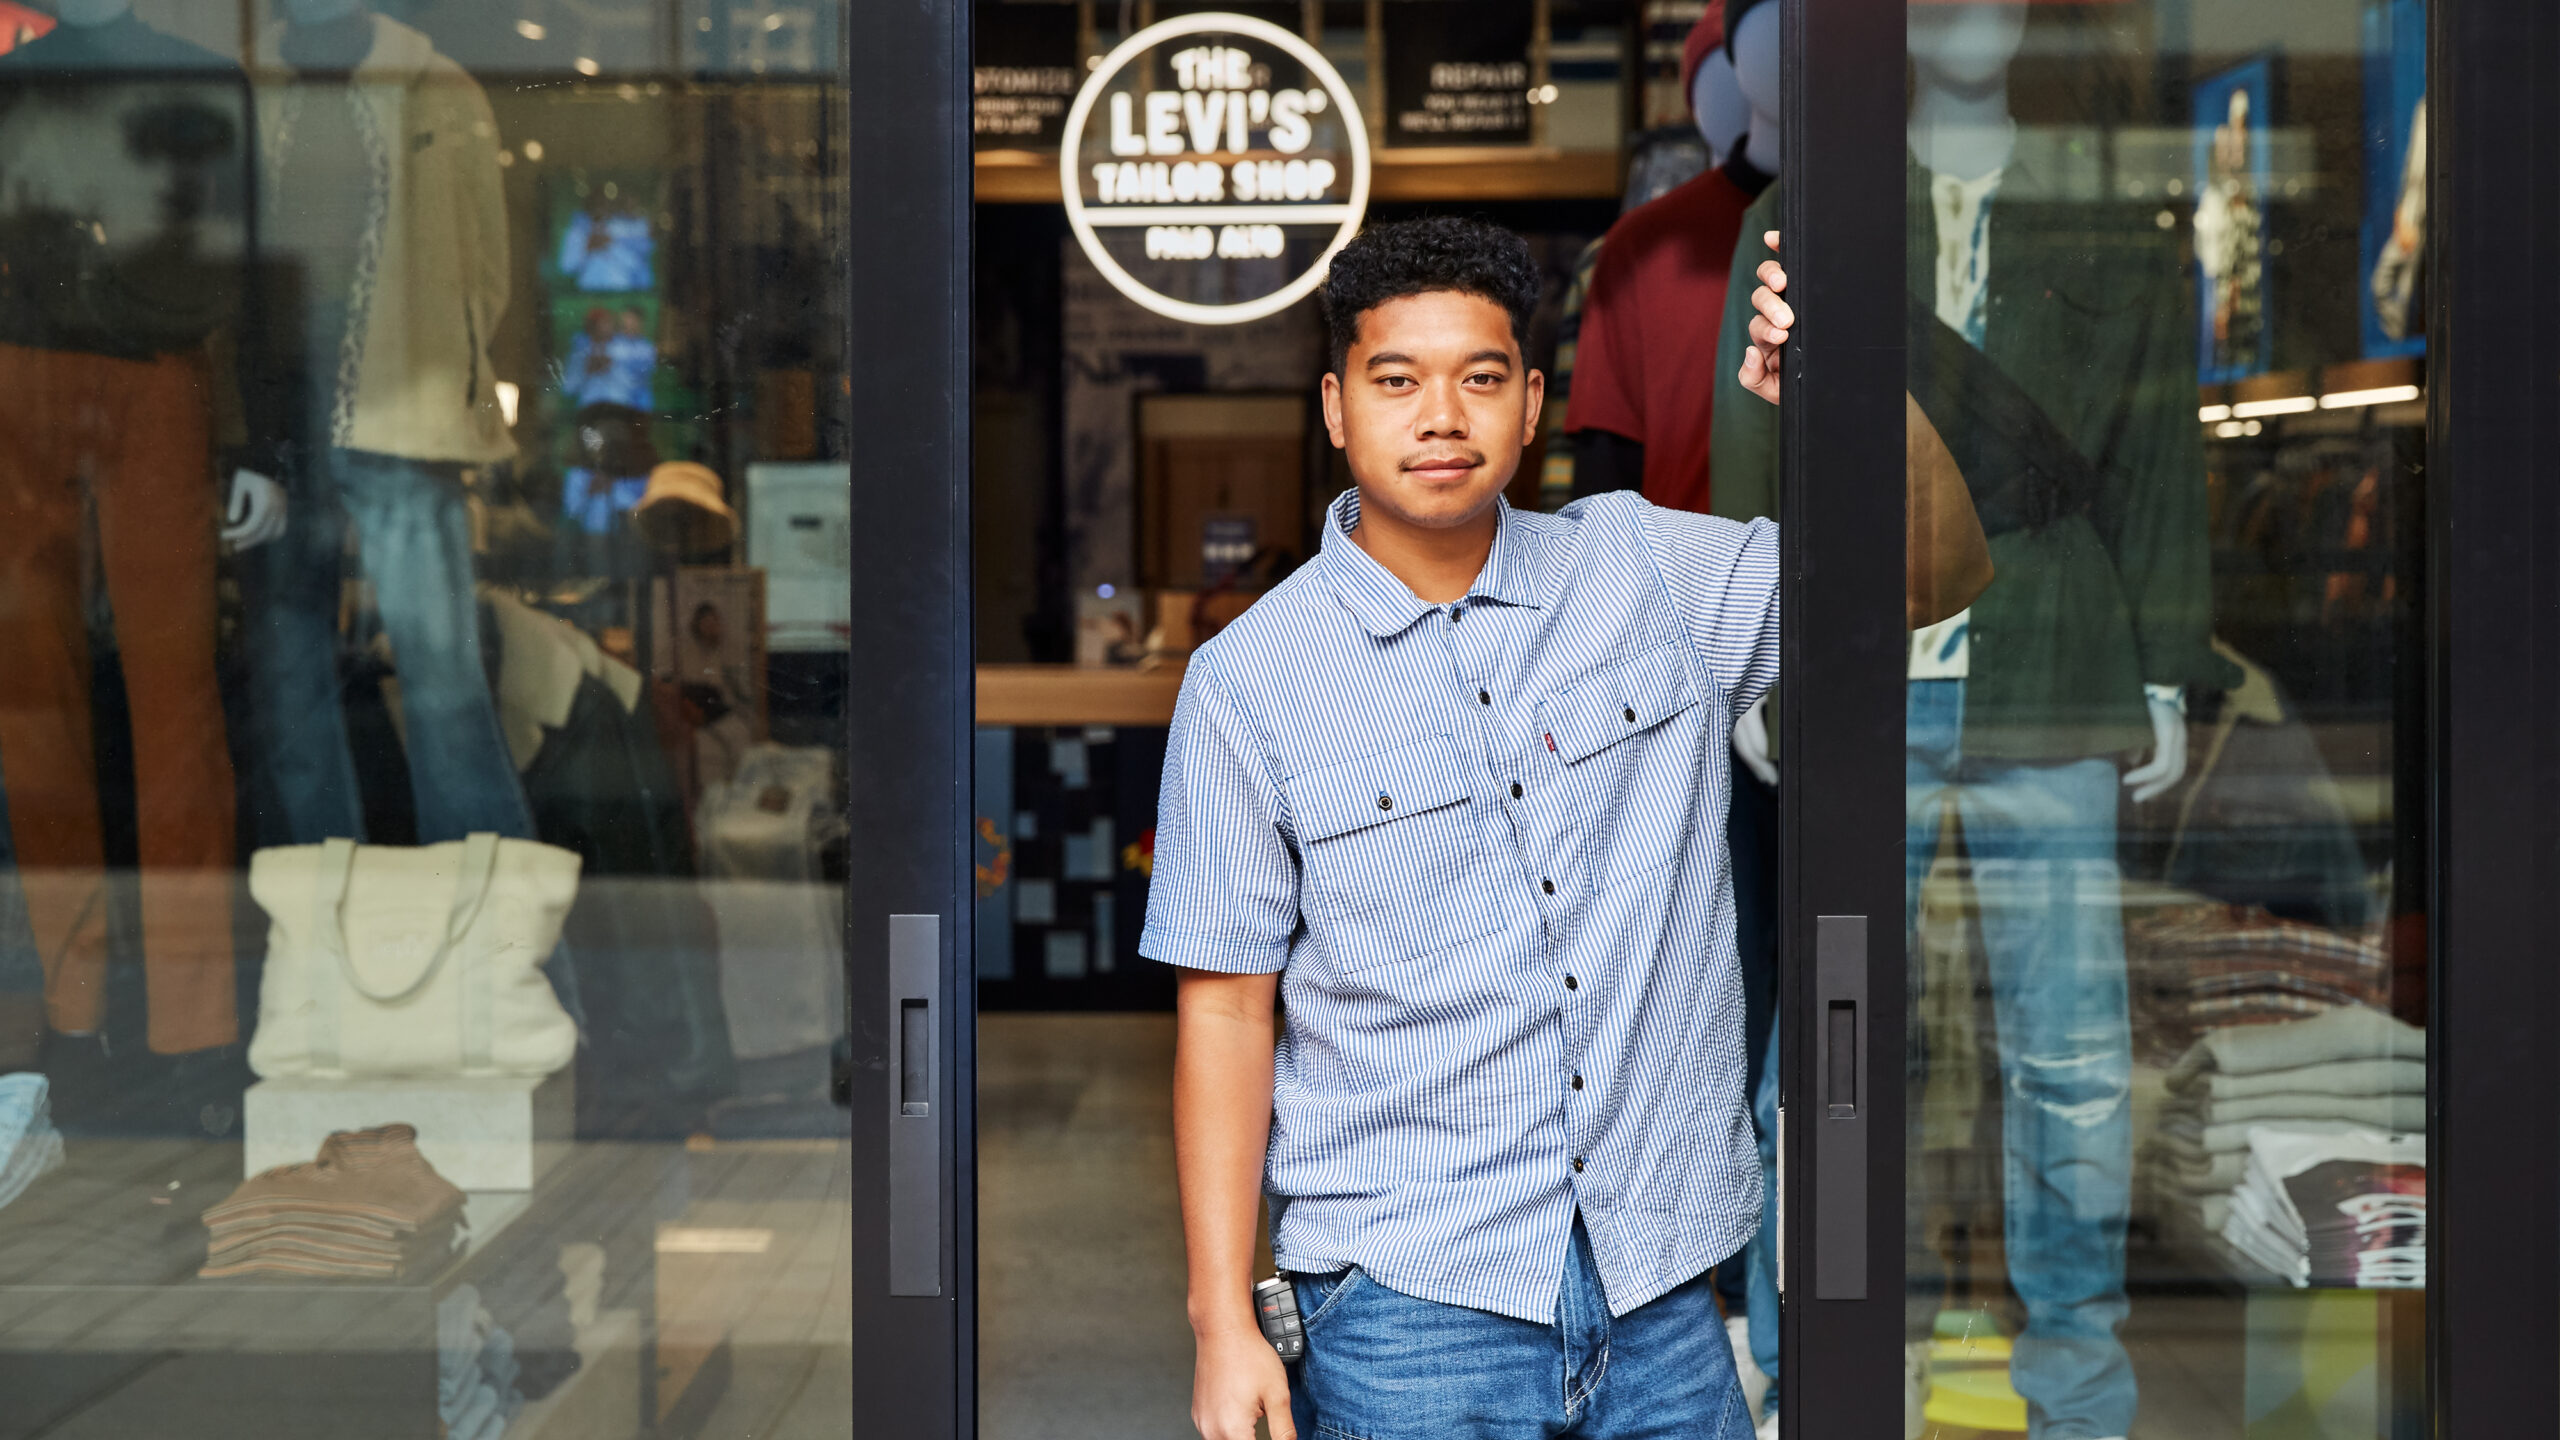 A Levi's® retail worker smiles at the front door of a Levi's® store.